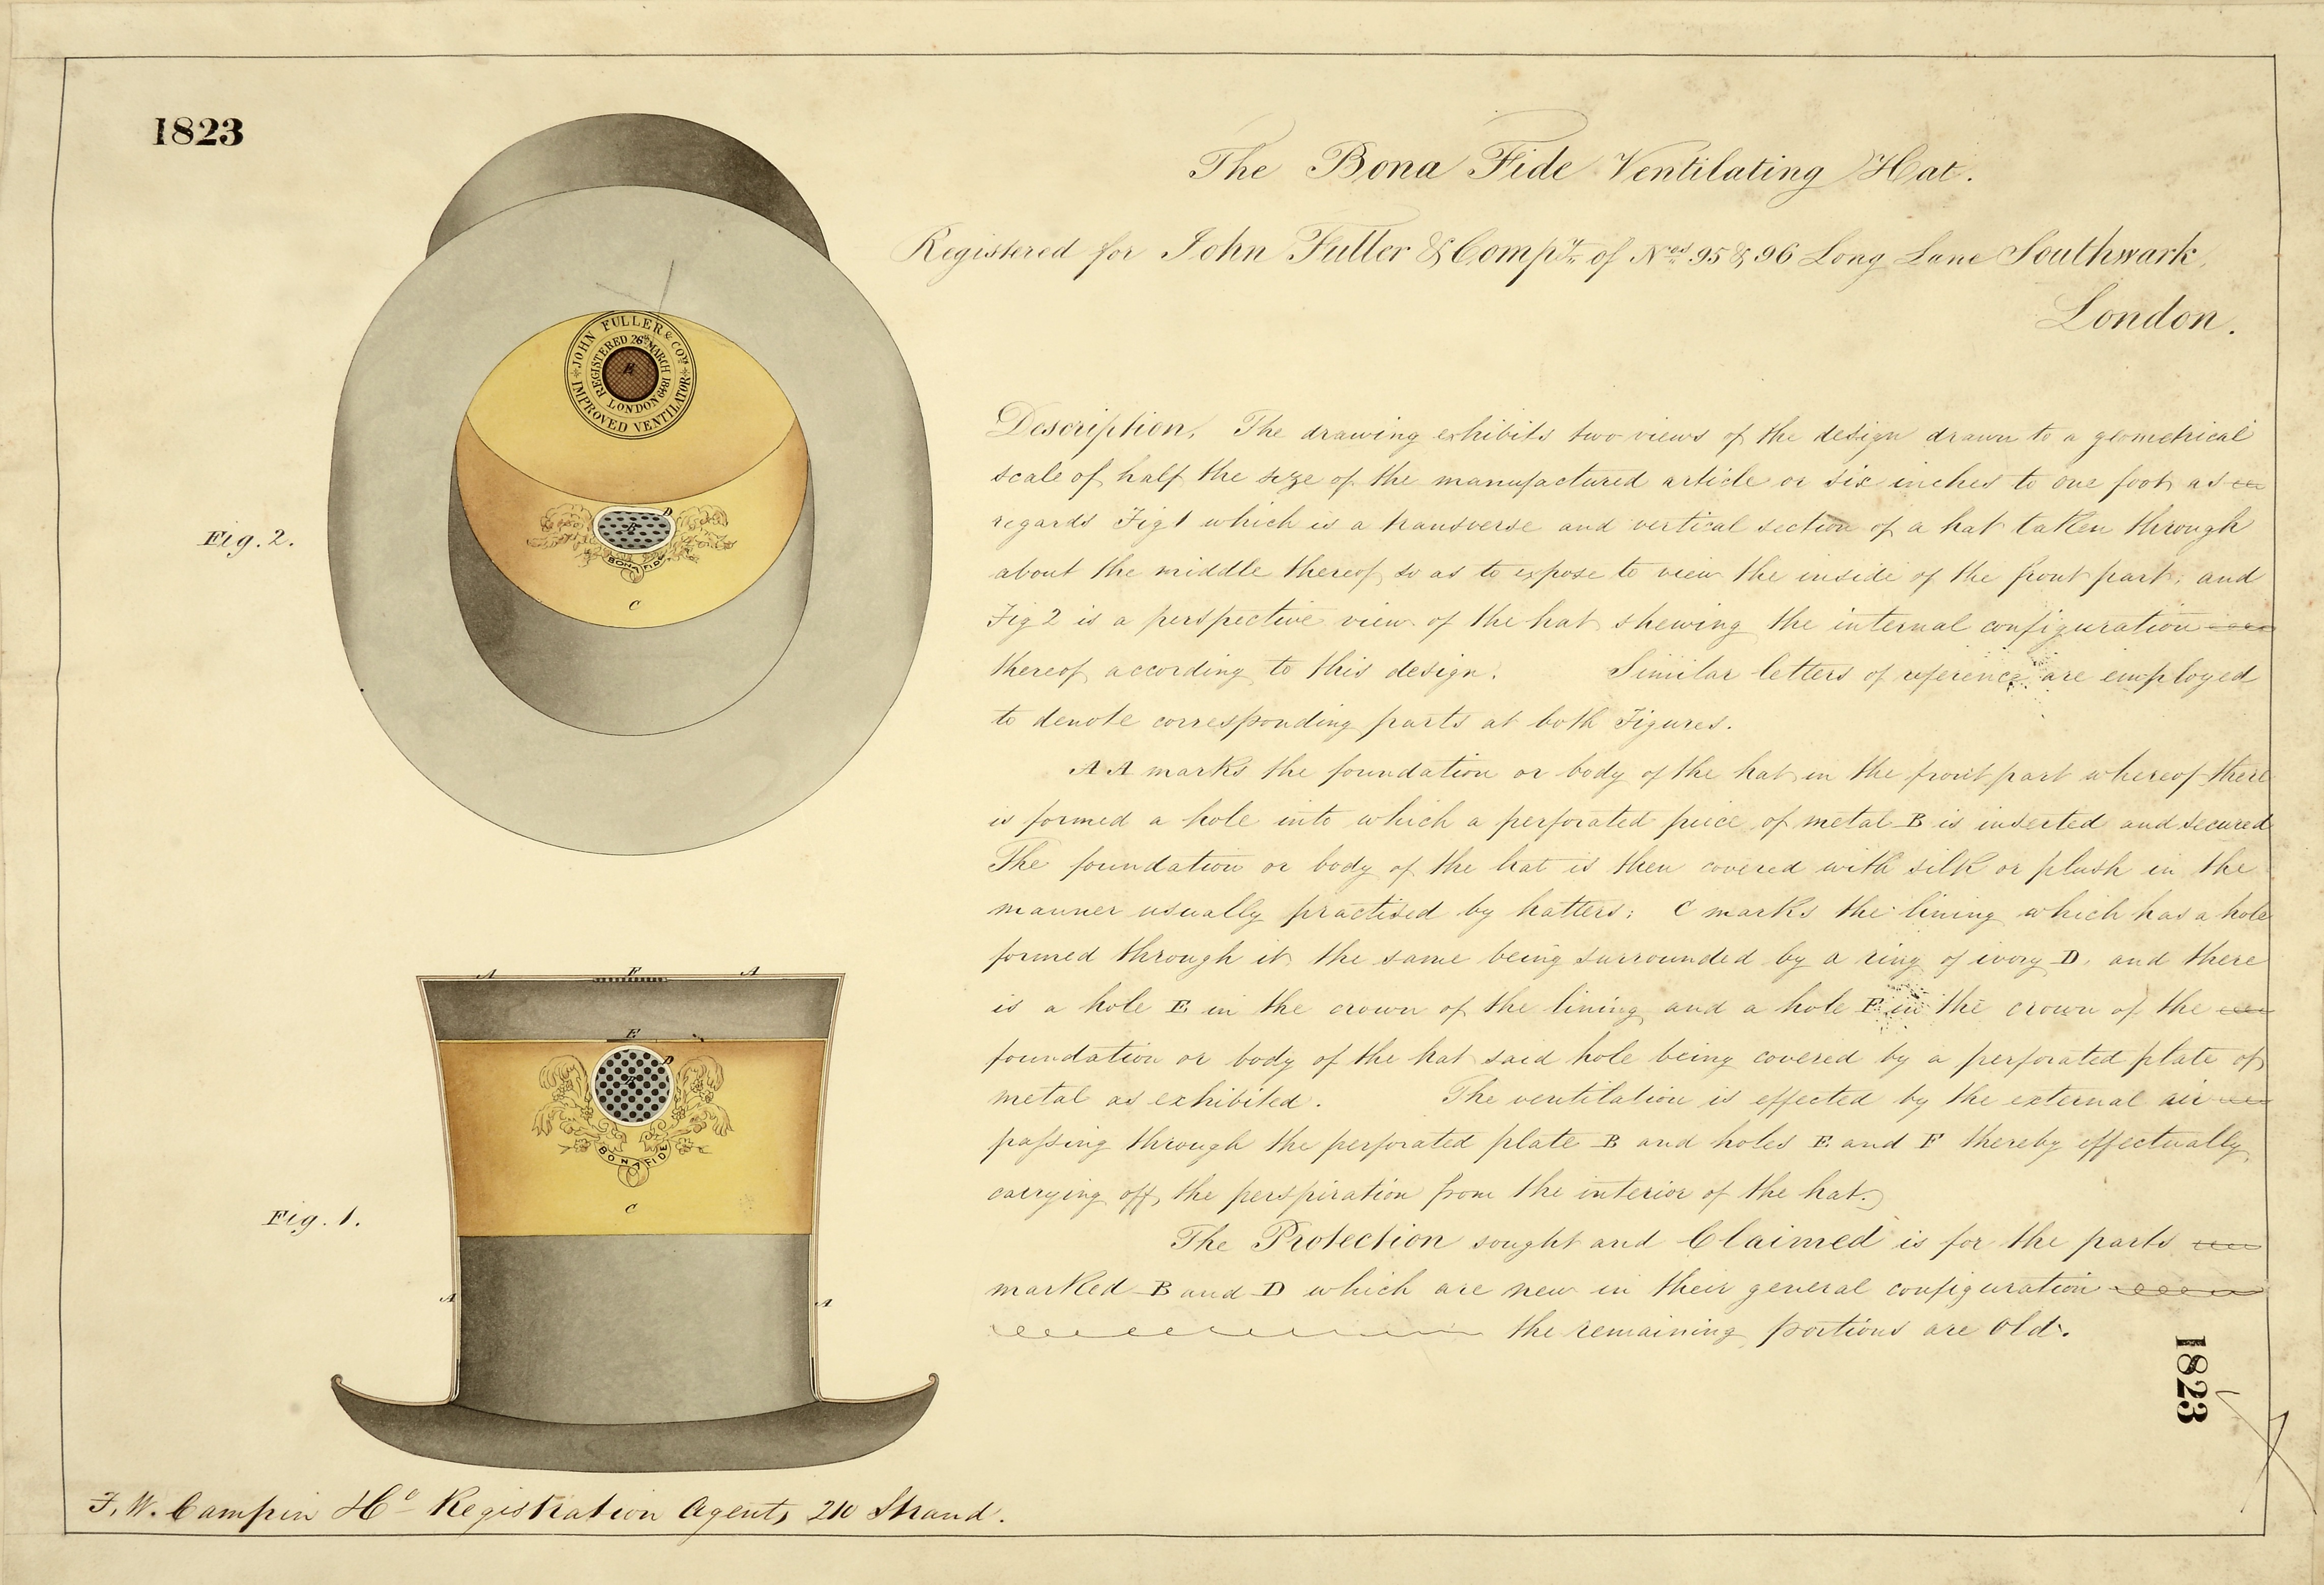 Image: BT 45/10 (1823) – Ventilating Hat – Top hats were heavy and heads could get quite hot – a combination of perspiration and hair oil could lead to an unpleasant atmosphere. The Bona Fide Ventilating Hat, which featured a system of grilles, aimed to solve this problem by ‘carrying off perspiration from the interior’